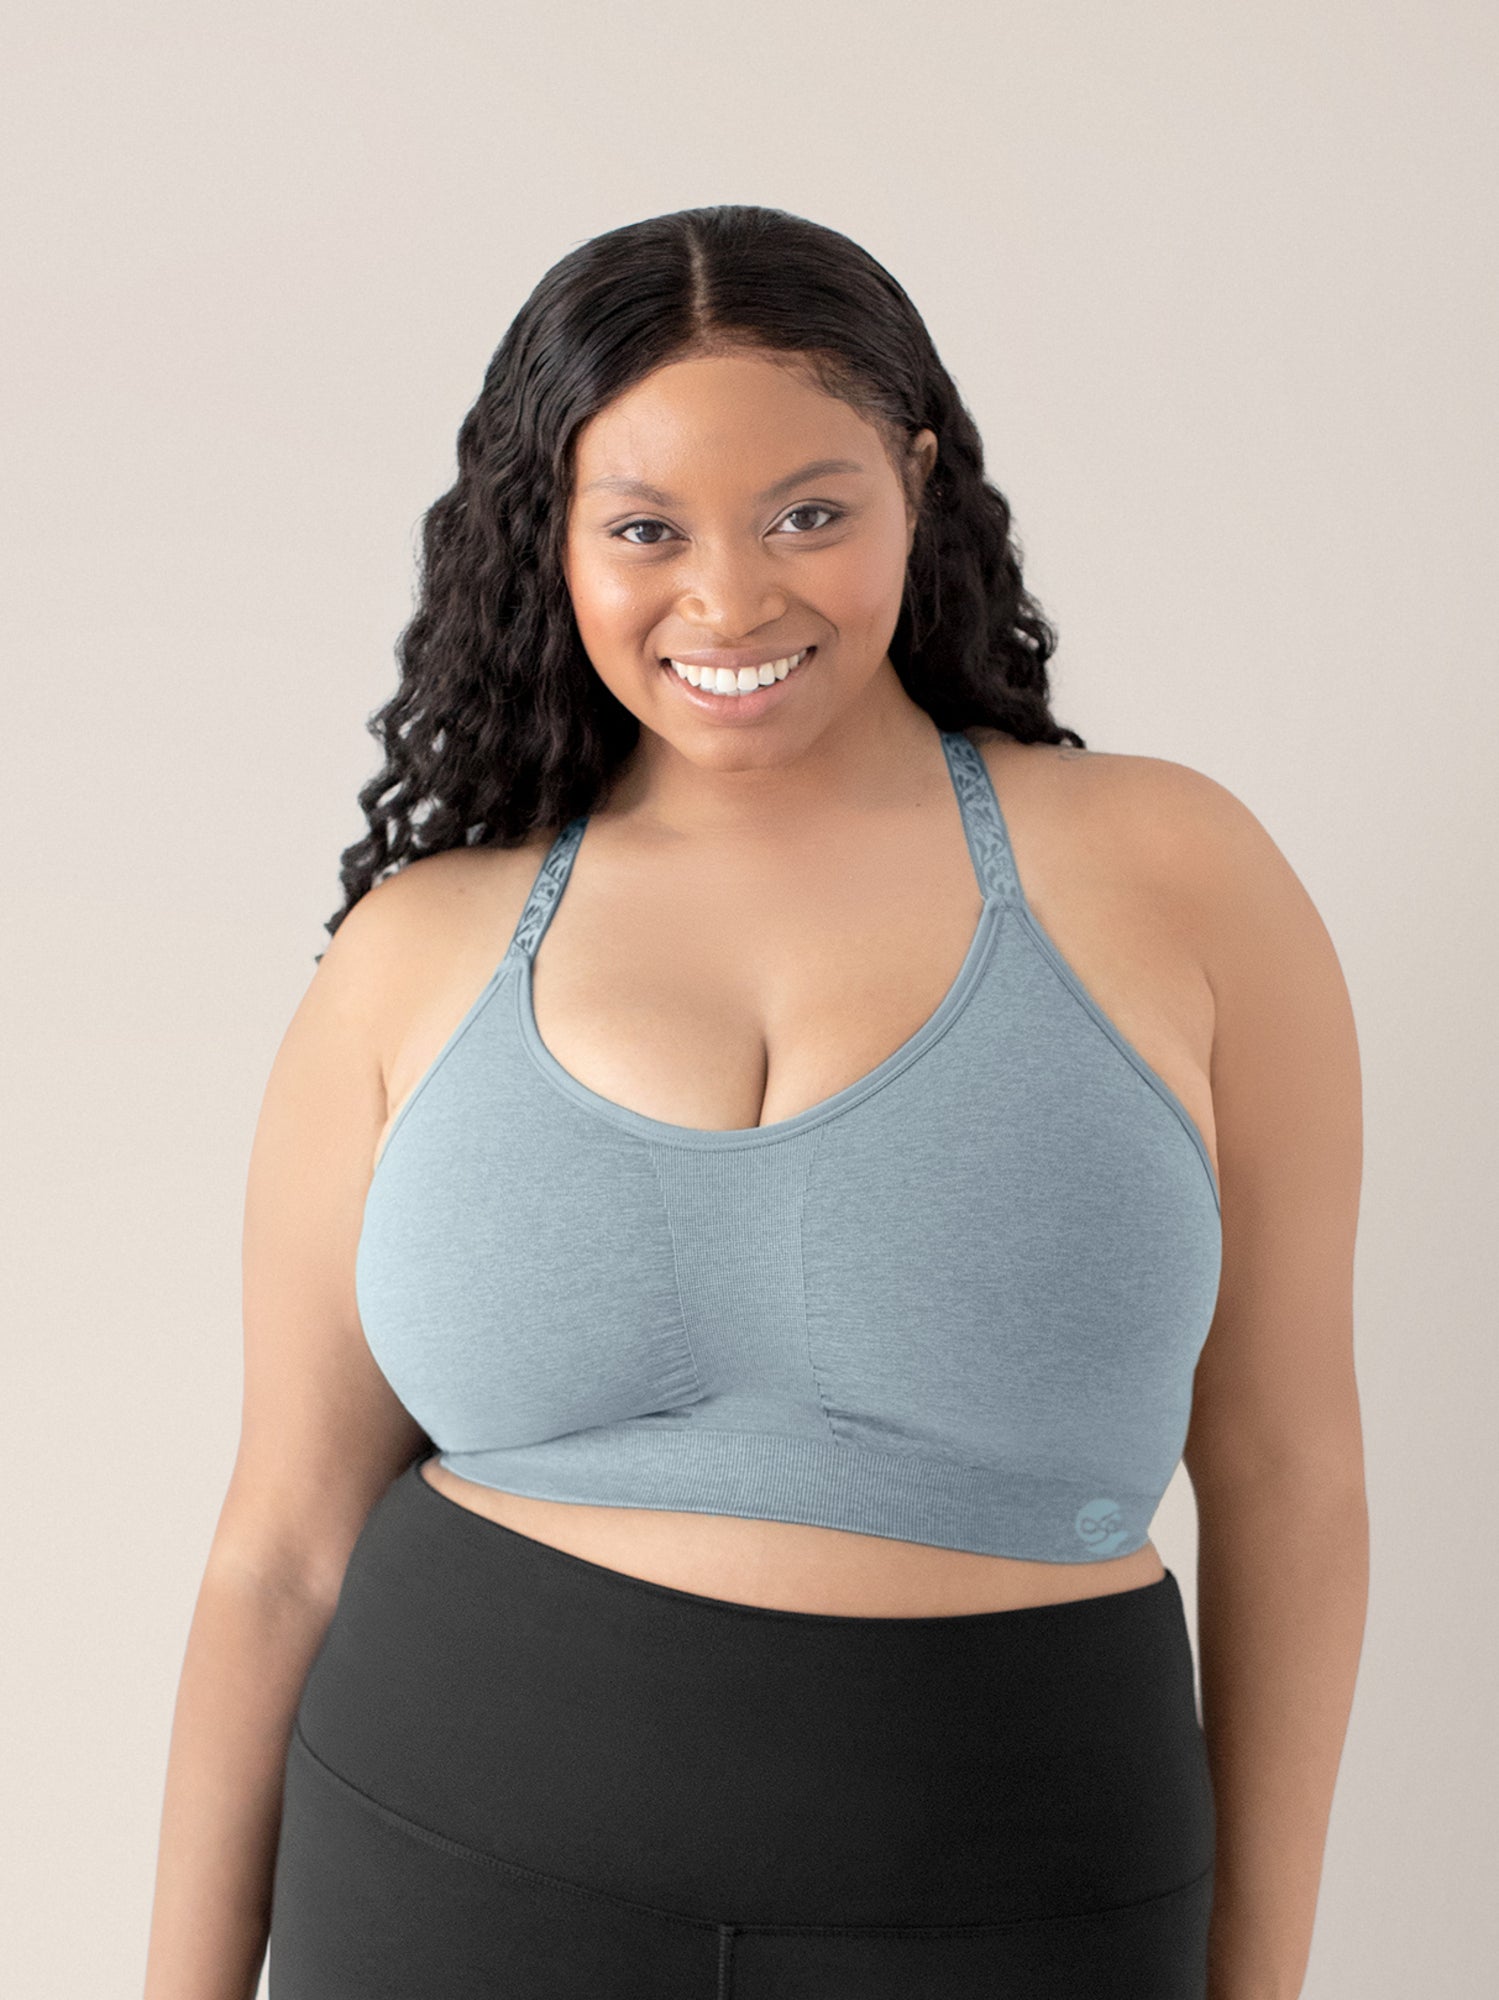 sport bra boobs - OFF-56% >Free Delivery